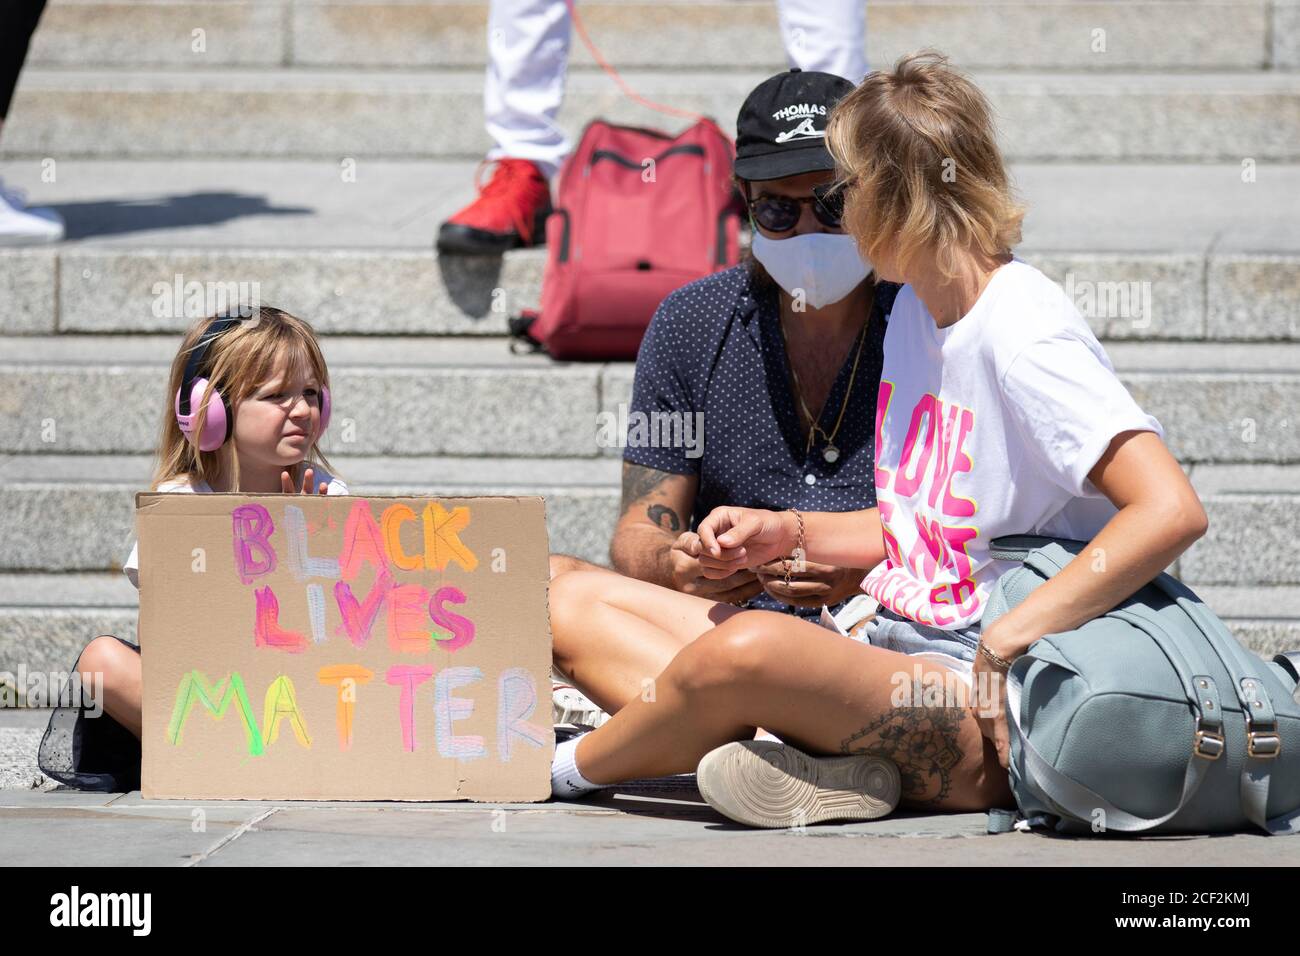 A young girl with her family holds a Black Lives Matter sign Stock Photo